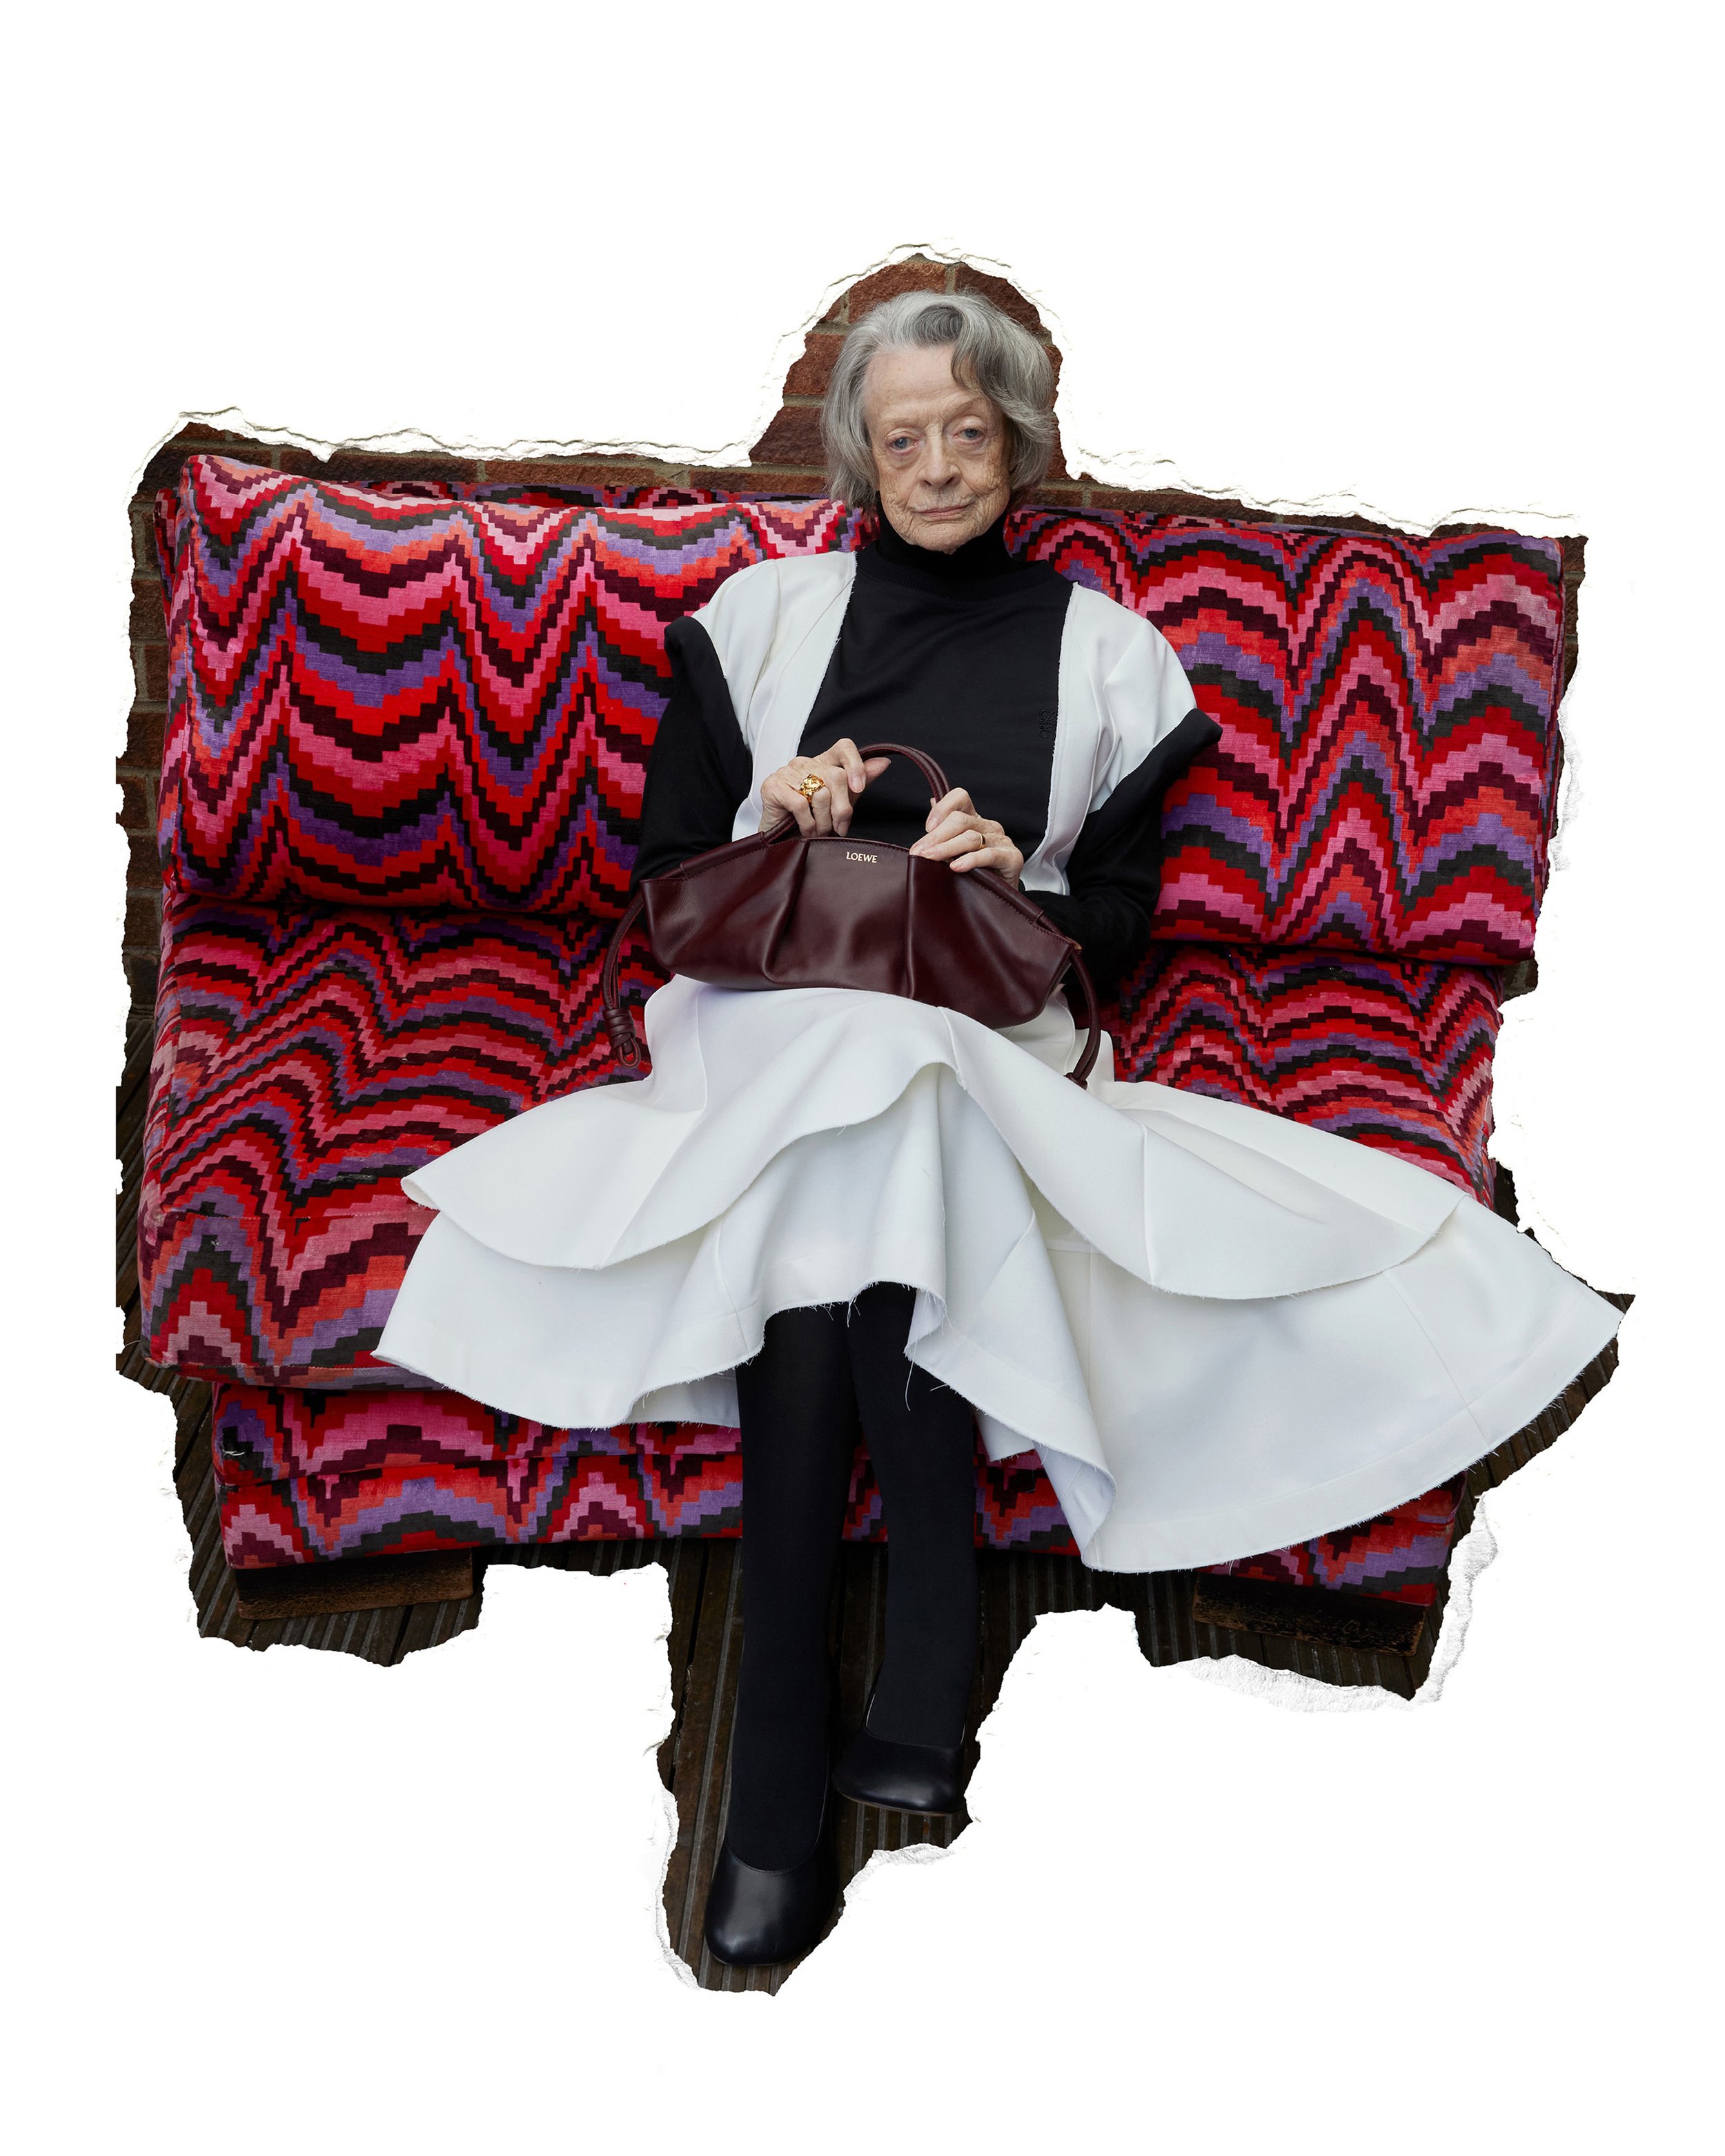 LOEWE_SS24_PRECO_JT_CAMPAIGN_MAGGIE_SMITH_RGB_CROPPED_4x5_CUT_OUT_LOE050723_1043.jpg